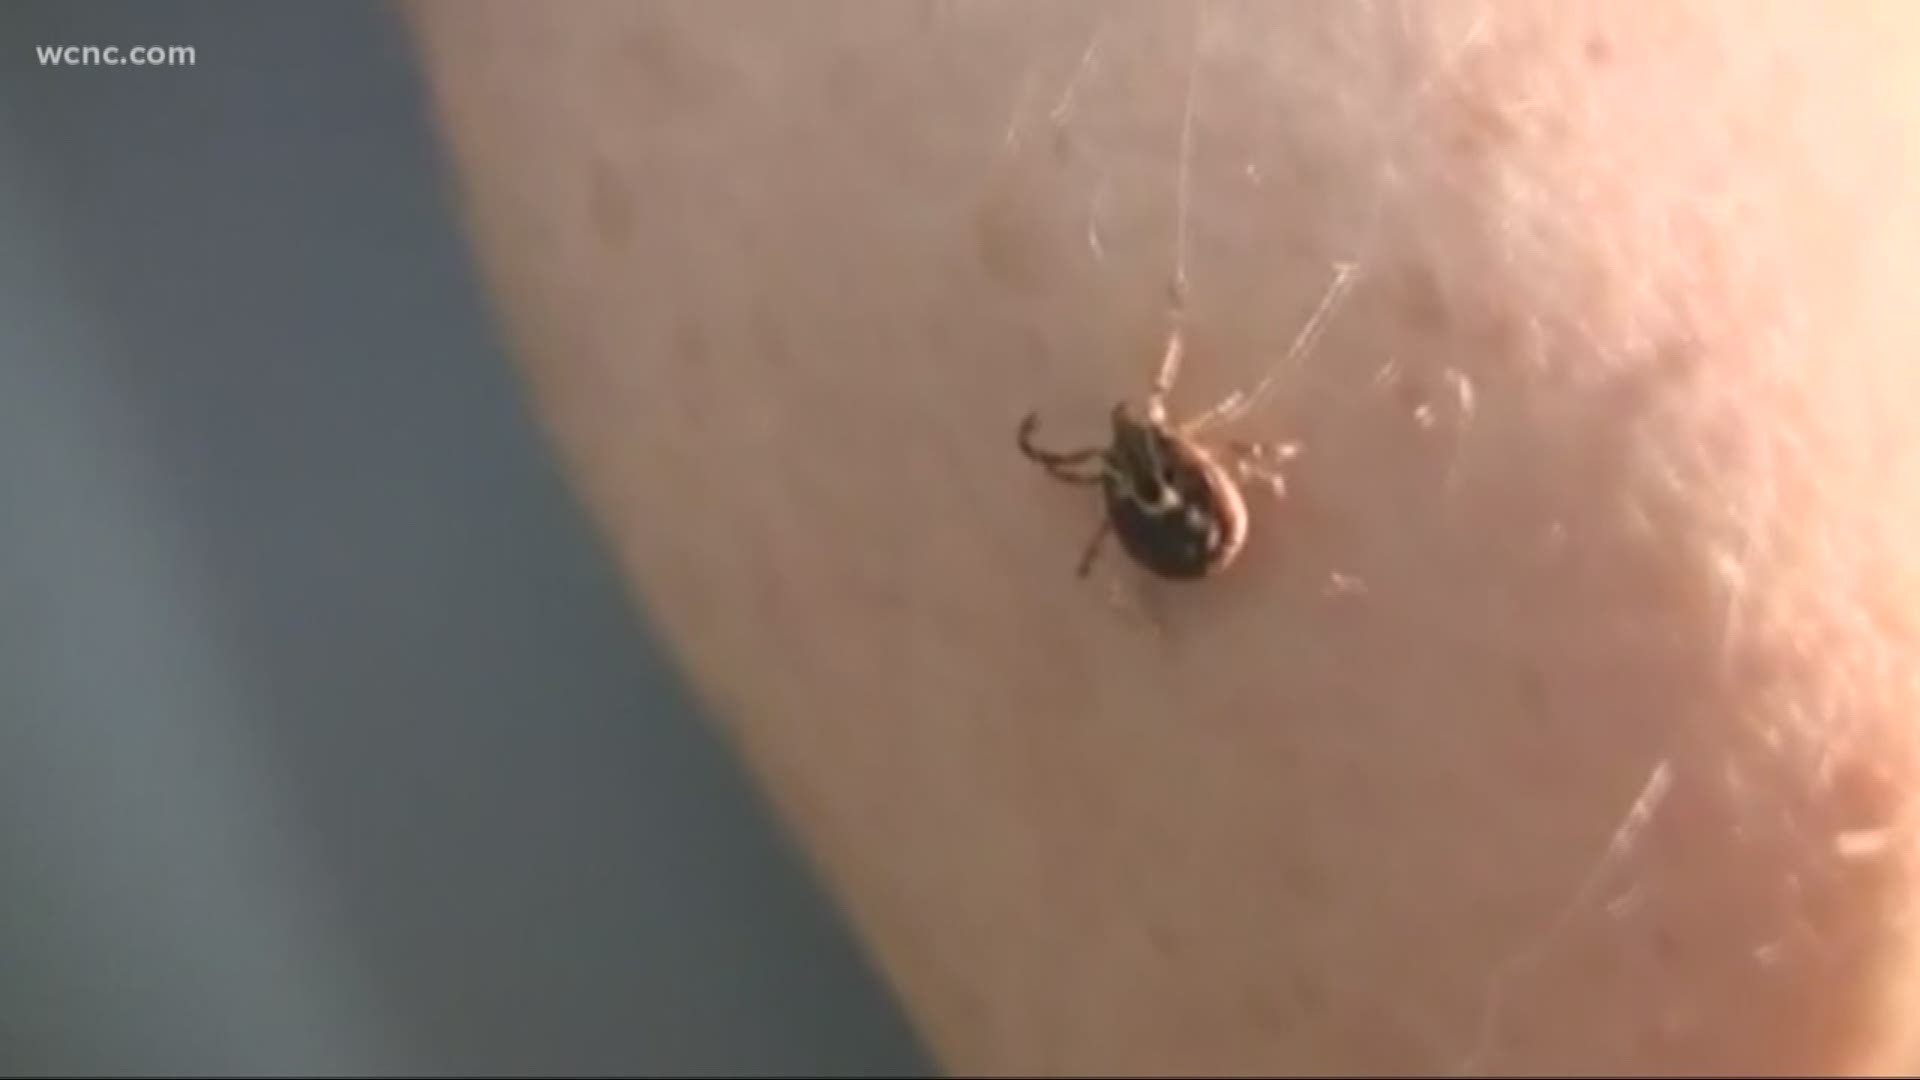 Ticks can carry several different diseases, most commonly Rocky Mountain spotted fever and Lyme disease. While the diseases are rare - they can be life-changing.